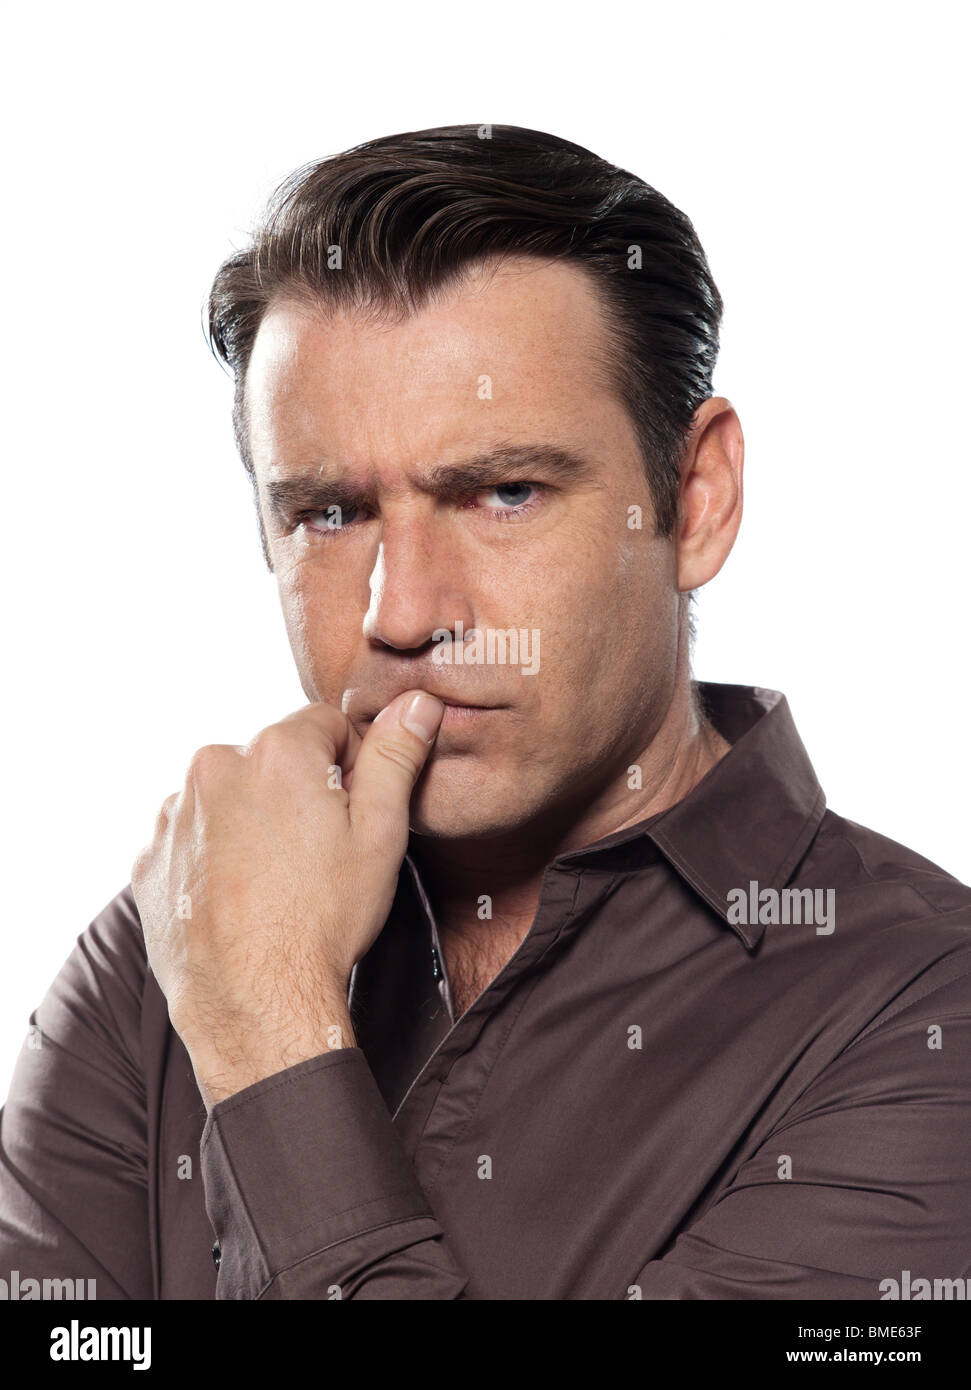 man portrait pucker worried serious studio isolated on white background Stock Photo